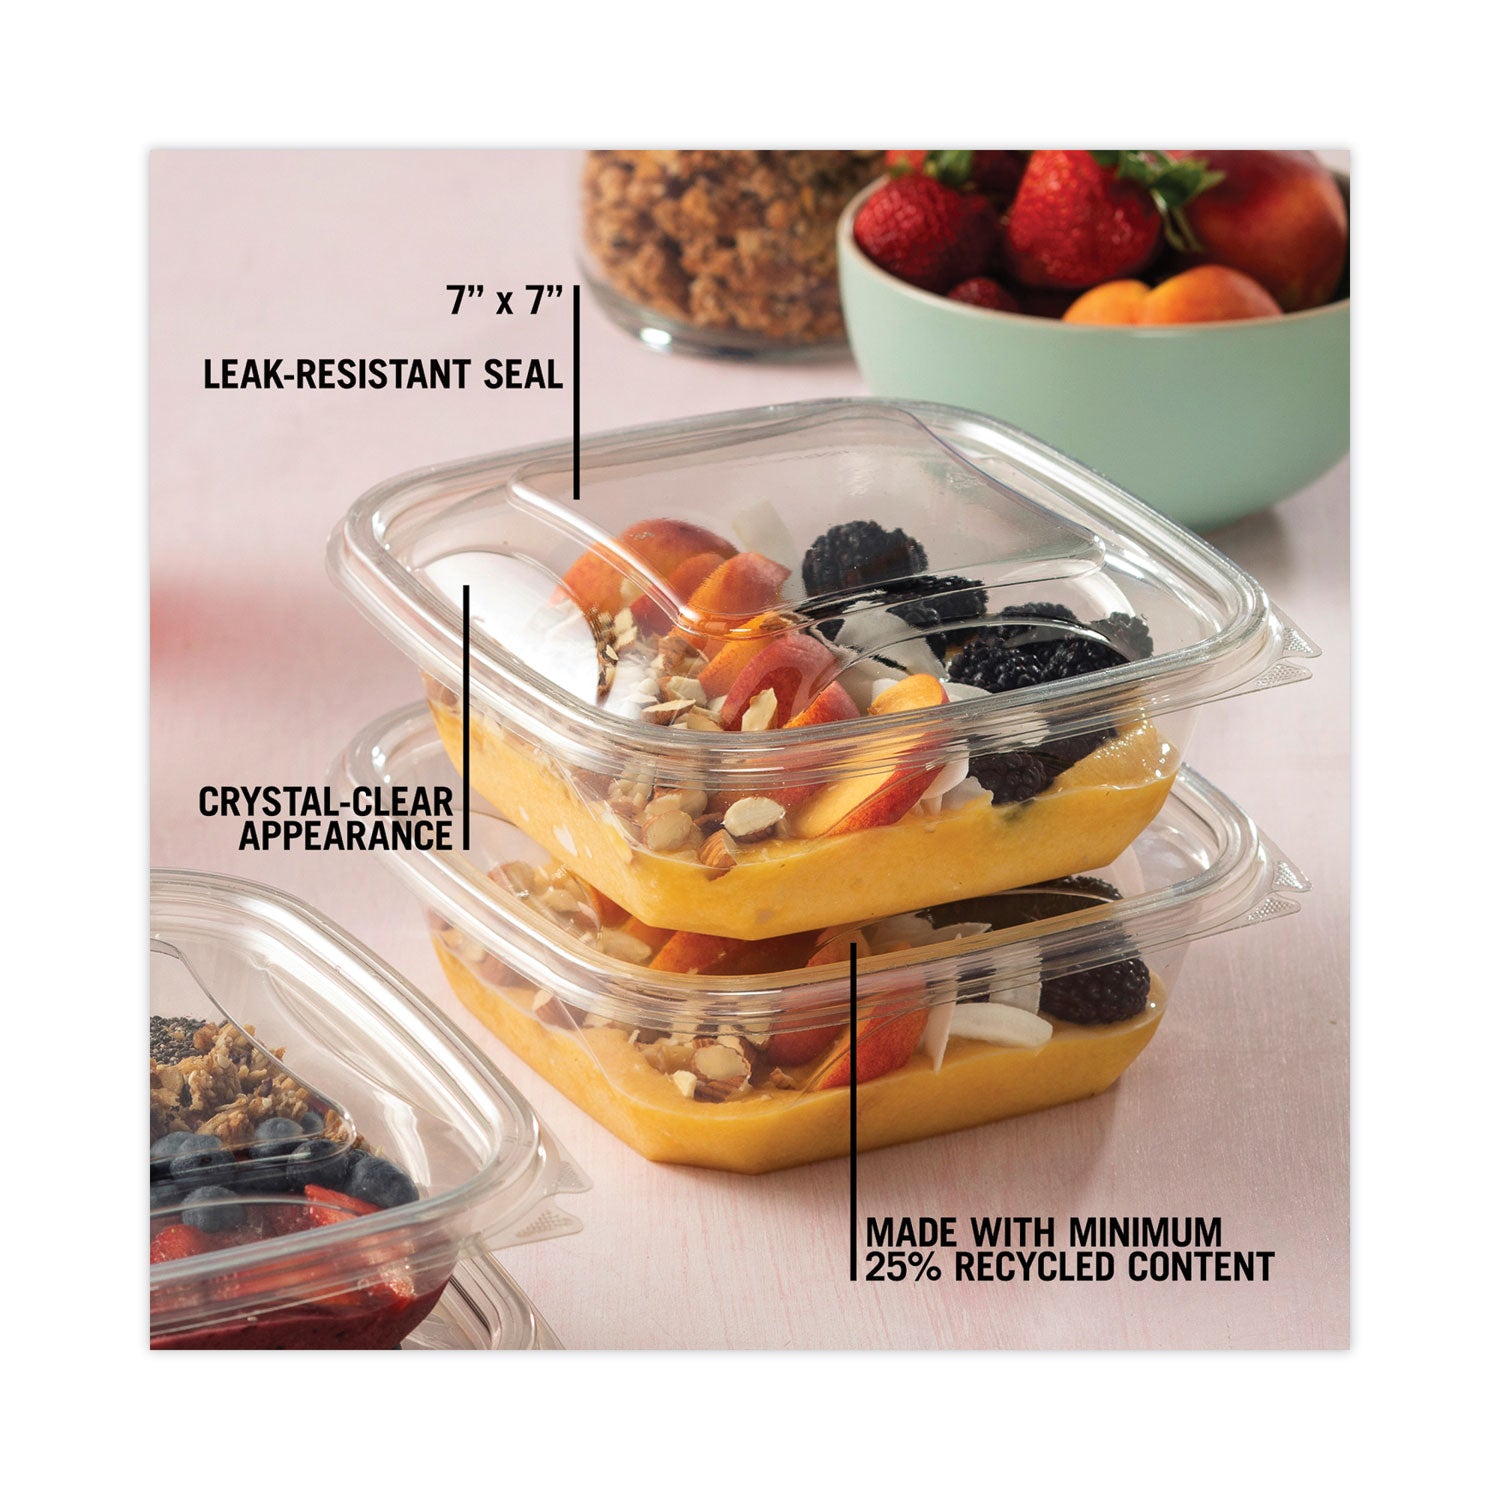 earthchoice-recycled-pet-container-lid-for-24-32-oz-container-bases-738-x-738-x-082-clear-plastic-300-carton_pctsacld07 - 6